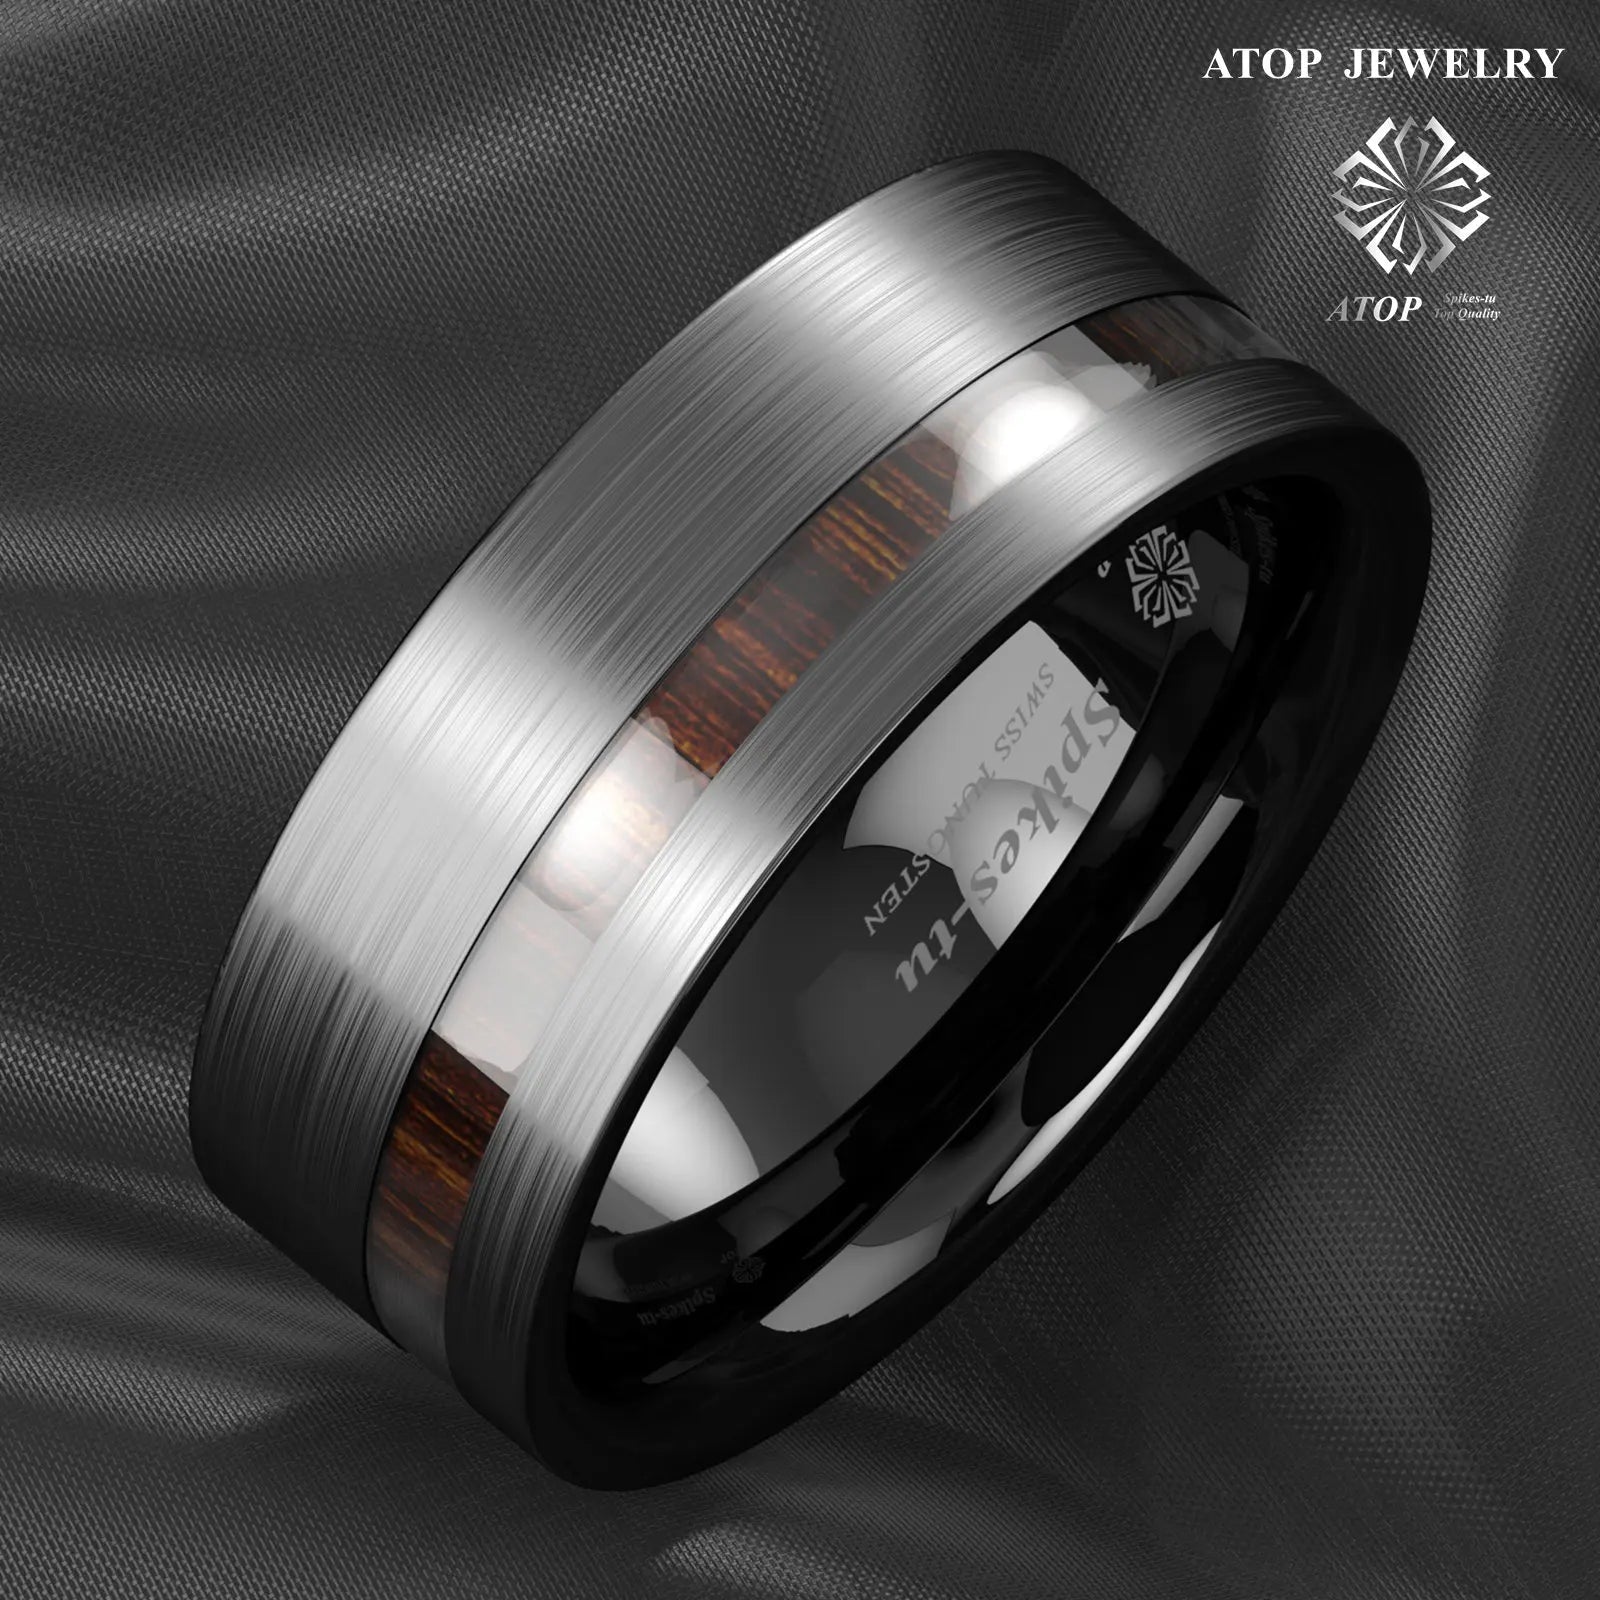 8mm Black Brushed Tungsten Carbide Ring with Koa Wood Inset - Waterproof & Fade - Resistant - Zyolly